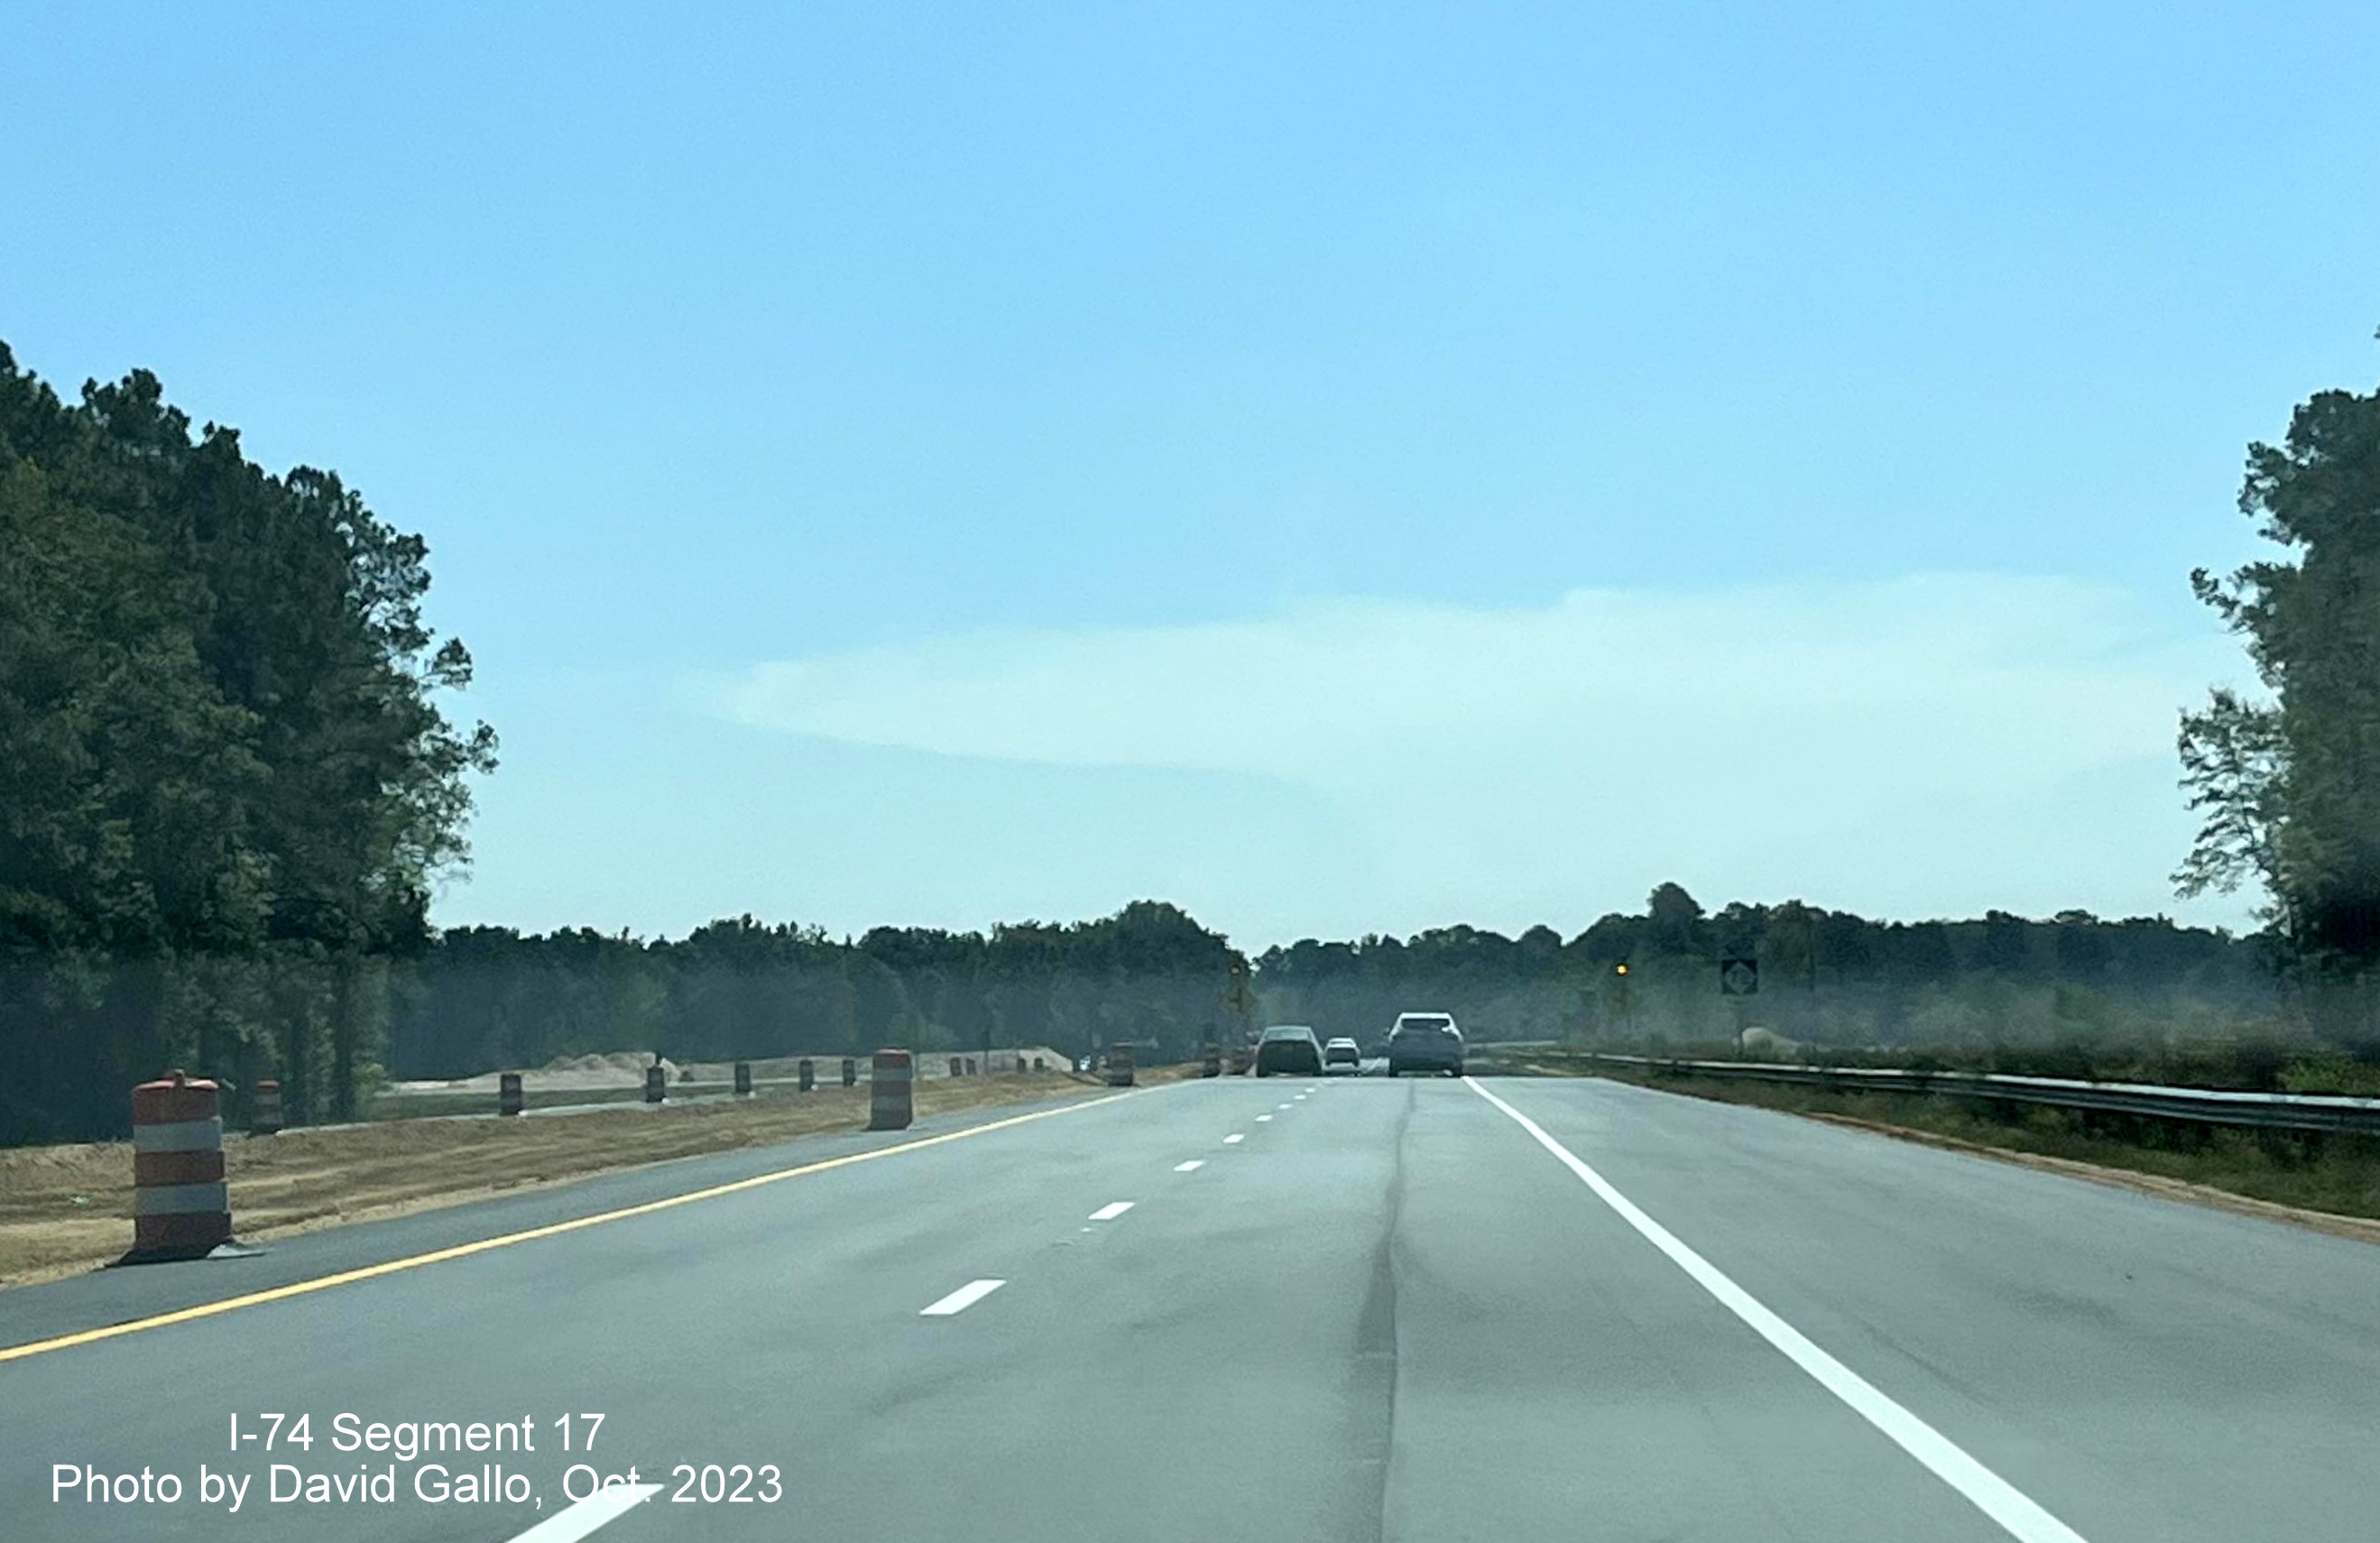 Image approaching now reopened NC 72 intersection on US 74 East near Boardman in interchange 
       construction area, by David Gallo, October 2023